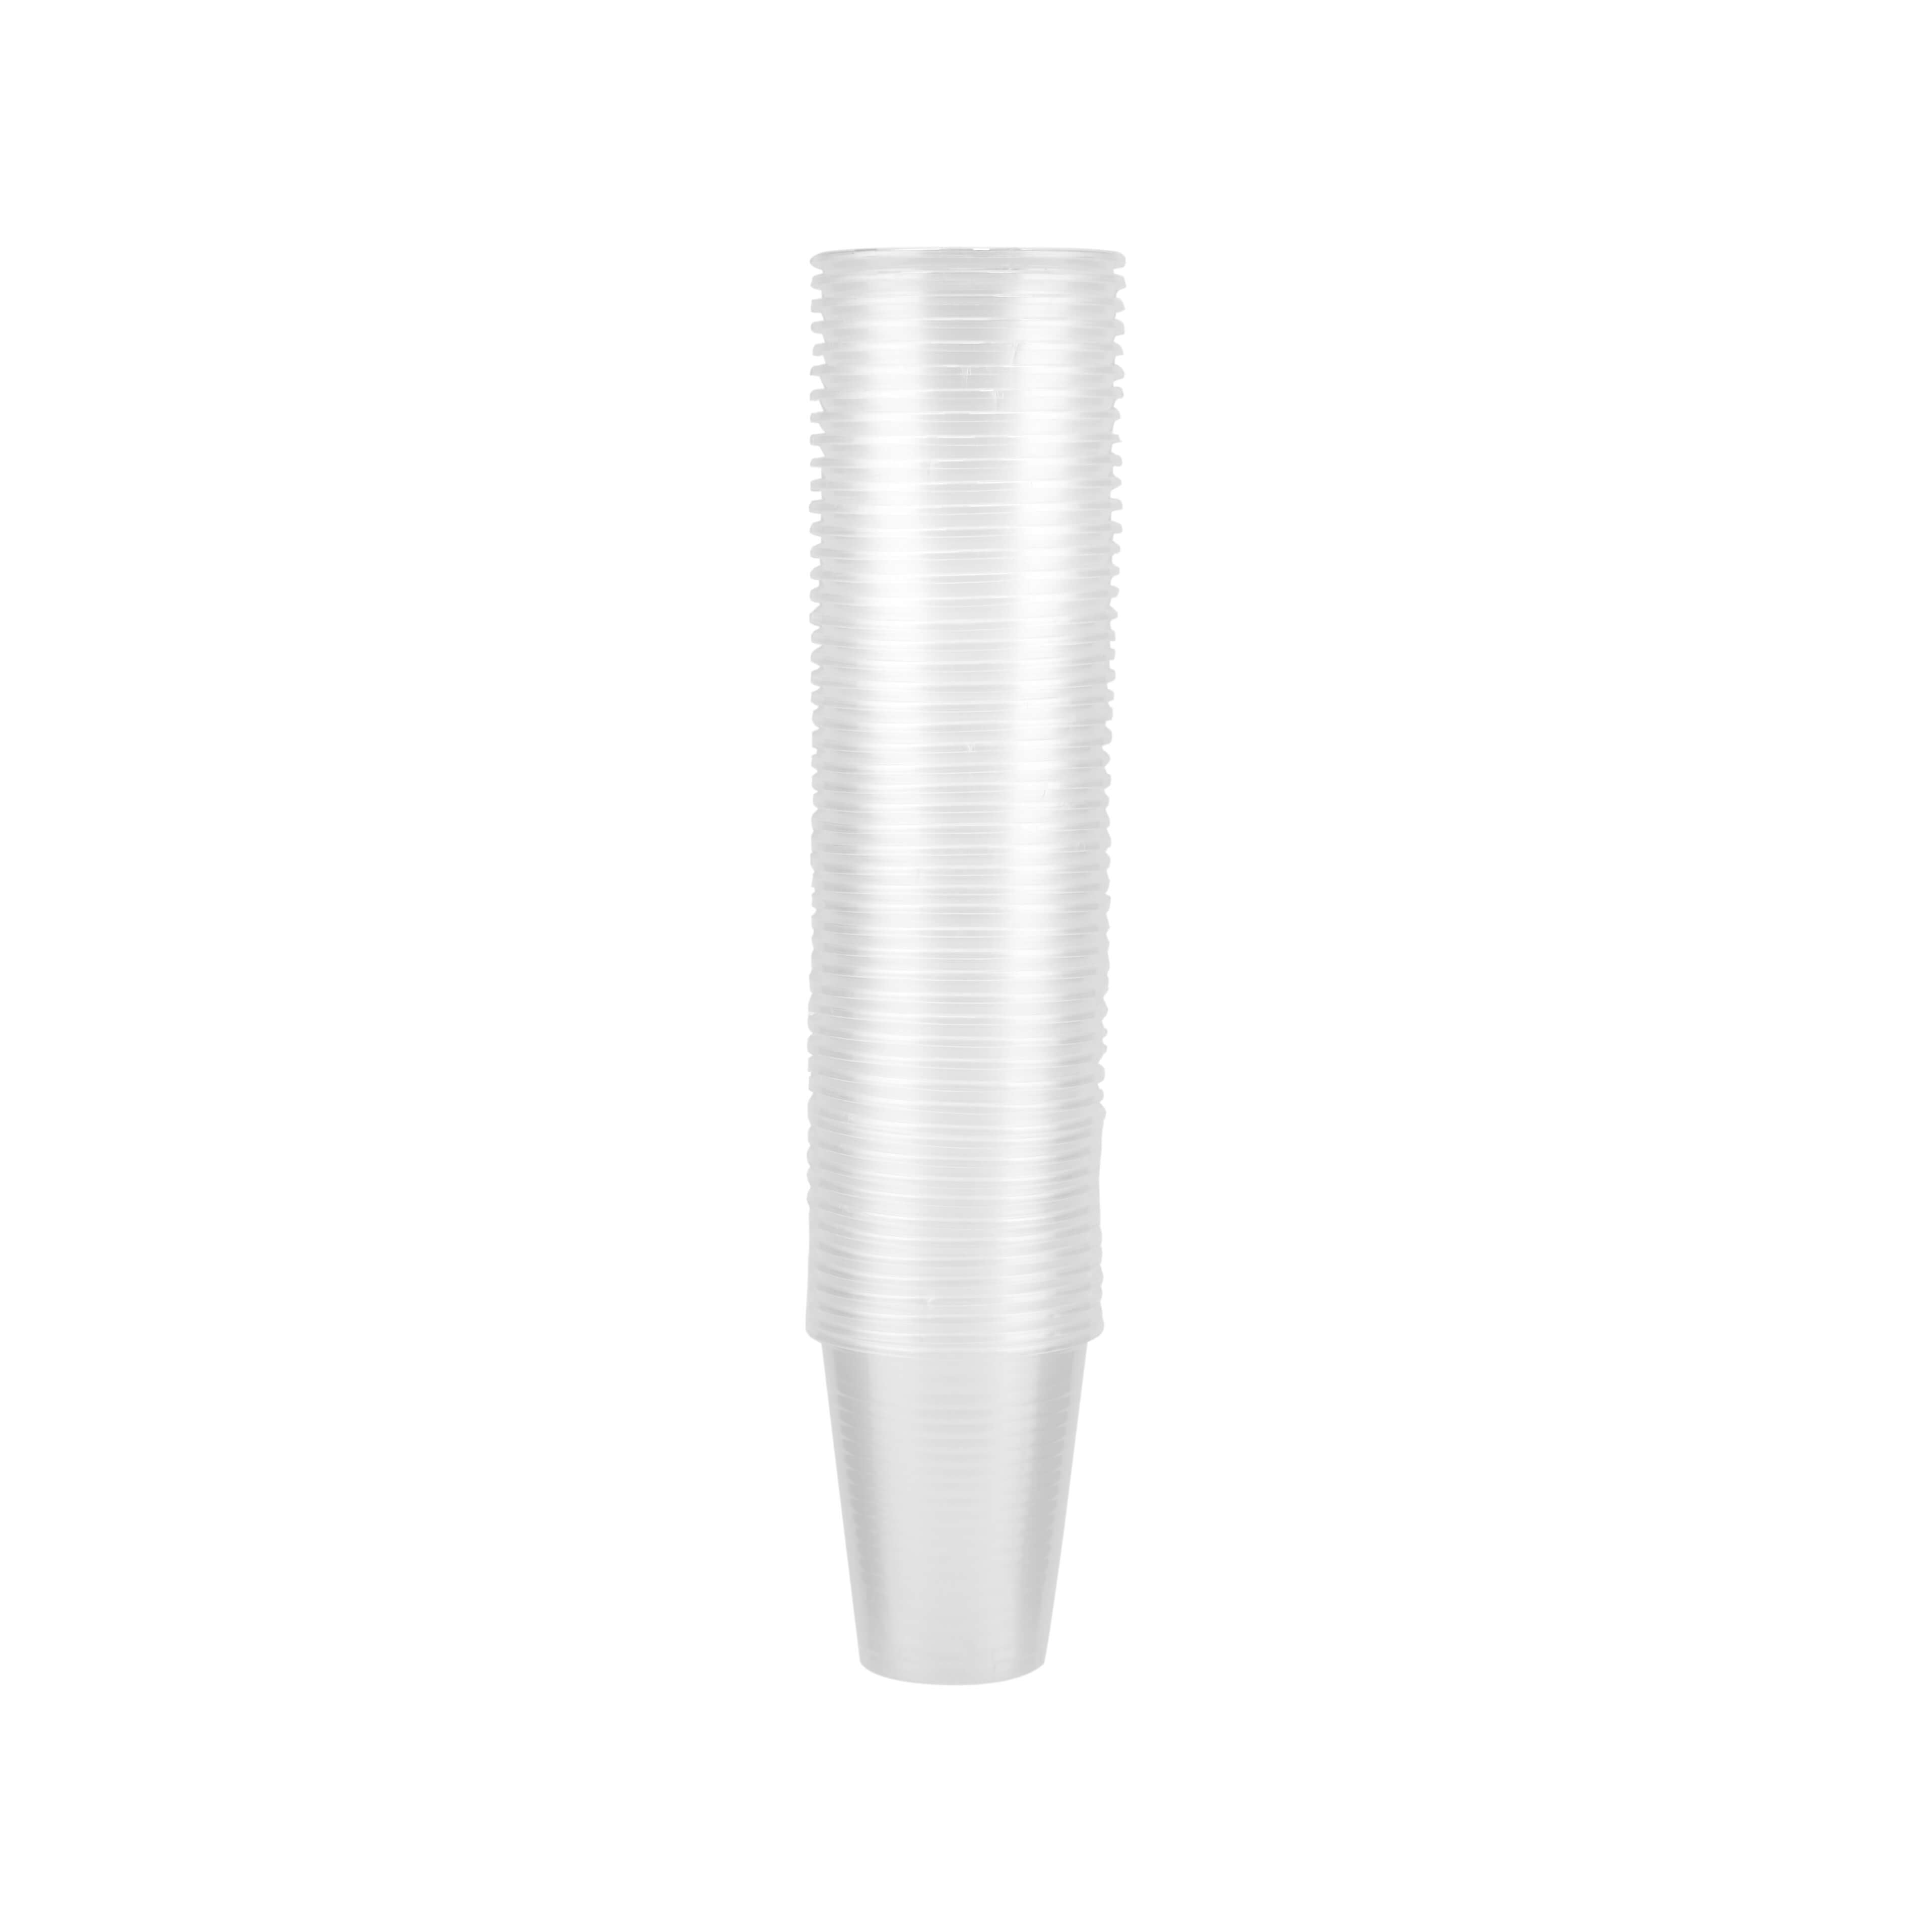 6Oz Clear Plastic Disposable Cup